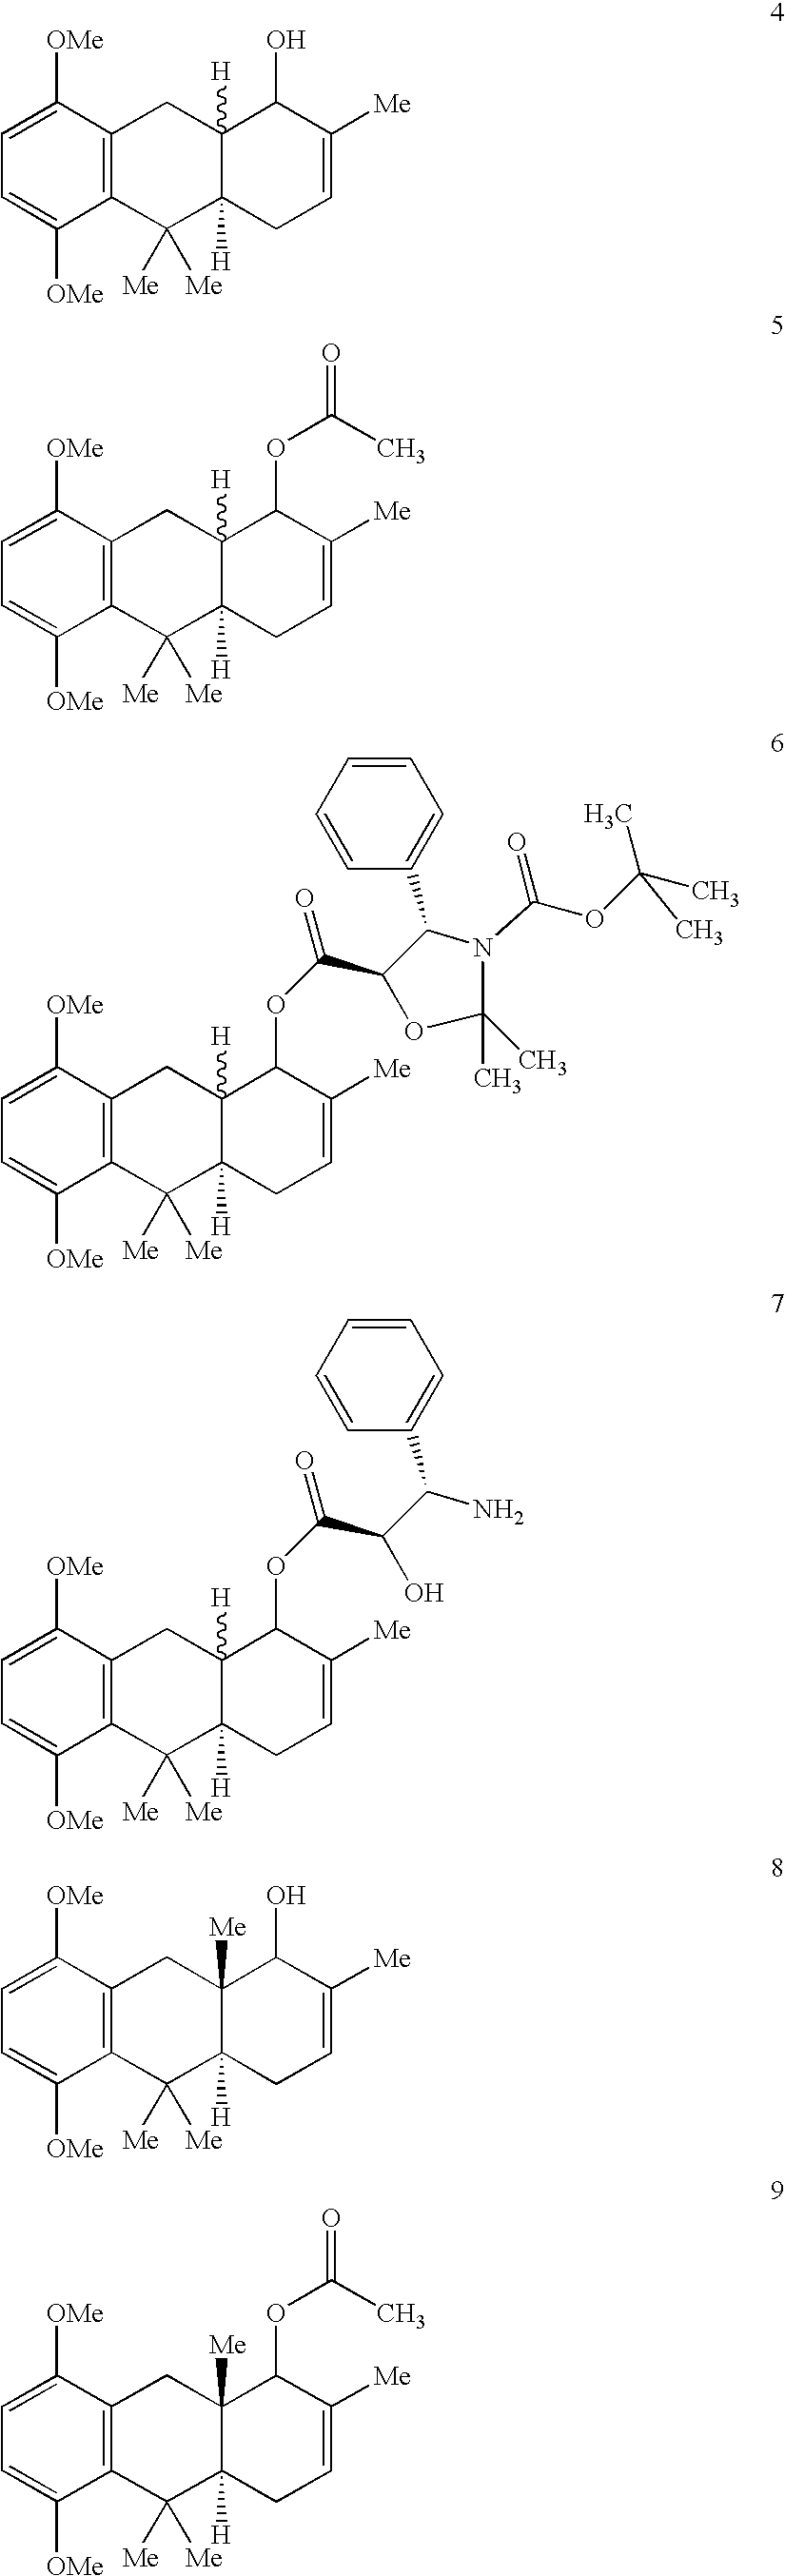 Hydroanthracene based compounds as anticancer agents